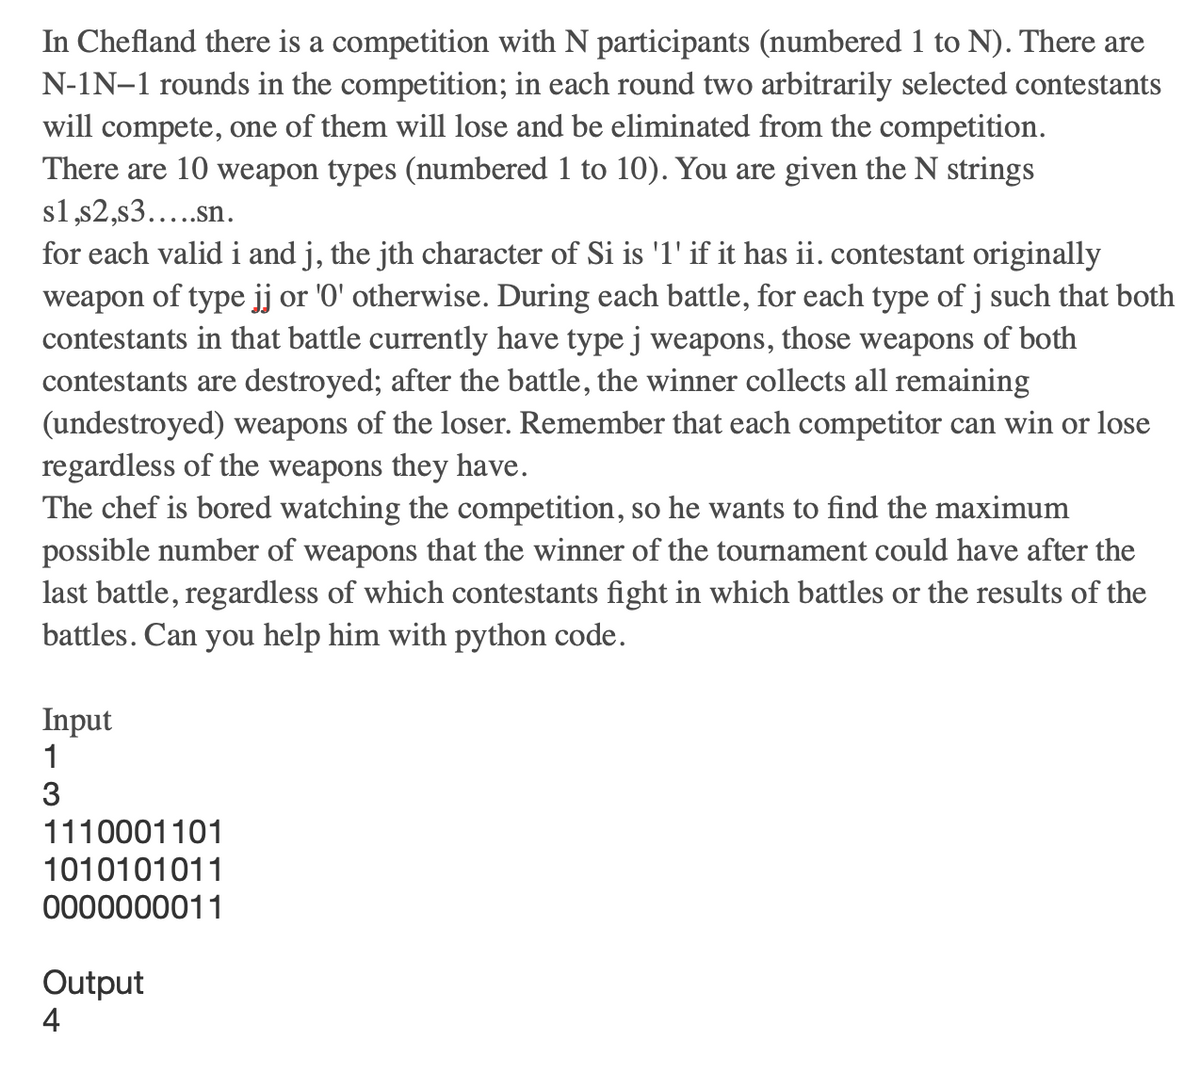 In Chefland there is a competition with N participants (numbered 1 to N). There are
N-IN-1 rounds in the competition; in each round two arbitrarily selected contestants
will compete, one of them will lose and be eliminated from the competition.
There are 10 weapon types (numbered 1 to 10). You are given the N strings
s1,s2,s3.....sn.
for each valid i and j, the jth character of Si is '1' if it has ii. contestant originally
weapon of type jj or '0' otherwise. During each battle, for each type of j such that both
contestants in that battle currently have type j weapons, those weapons of both
contestants are destroyed; after the battle, the winner collects all remaining
(undestroyed) weapons of the loser. Remember that each competitor can win or lose
regardless of the weapons they have.
The chef is bored watching the competition, so he wants to find the maximum
possible number of weapons that the winner of the tournament could have after the
last battle, regardless of which contestants fight in which battles or the results of the
battles. Can you help him with python code.
Input
1
3
1110001101
1010101011
0000000011
Output
4